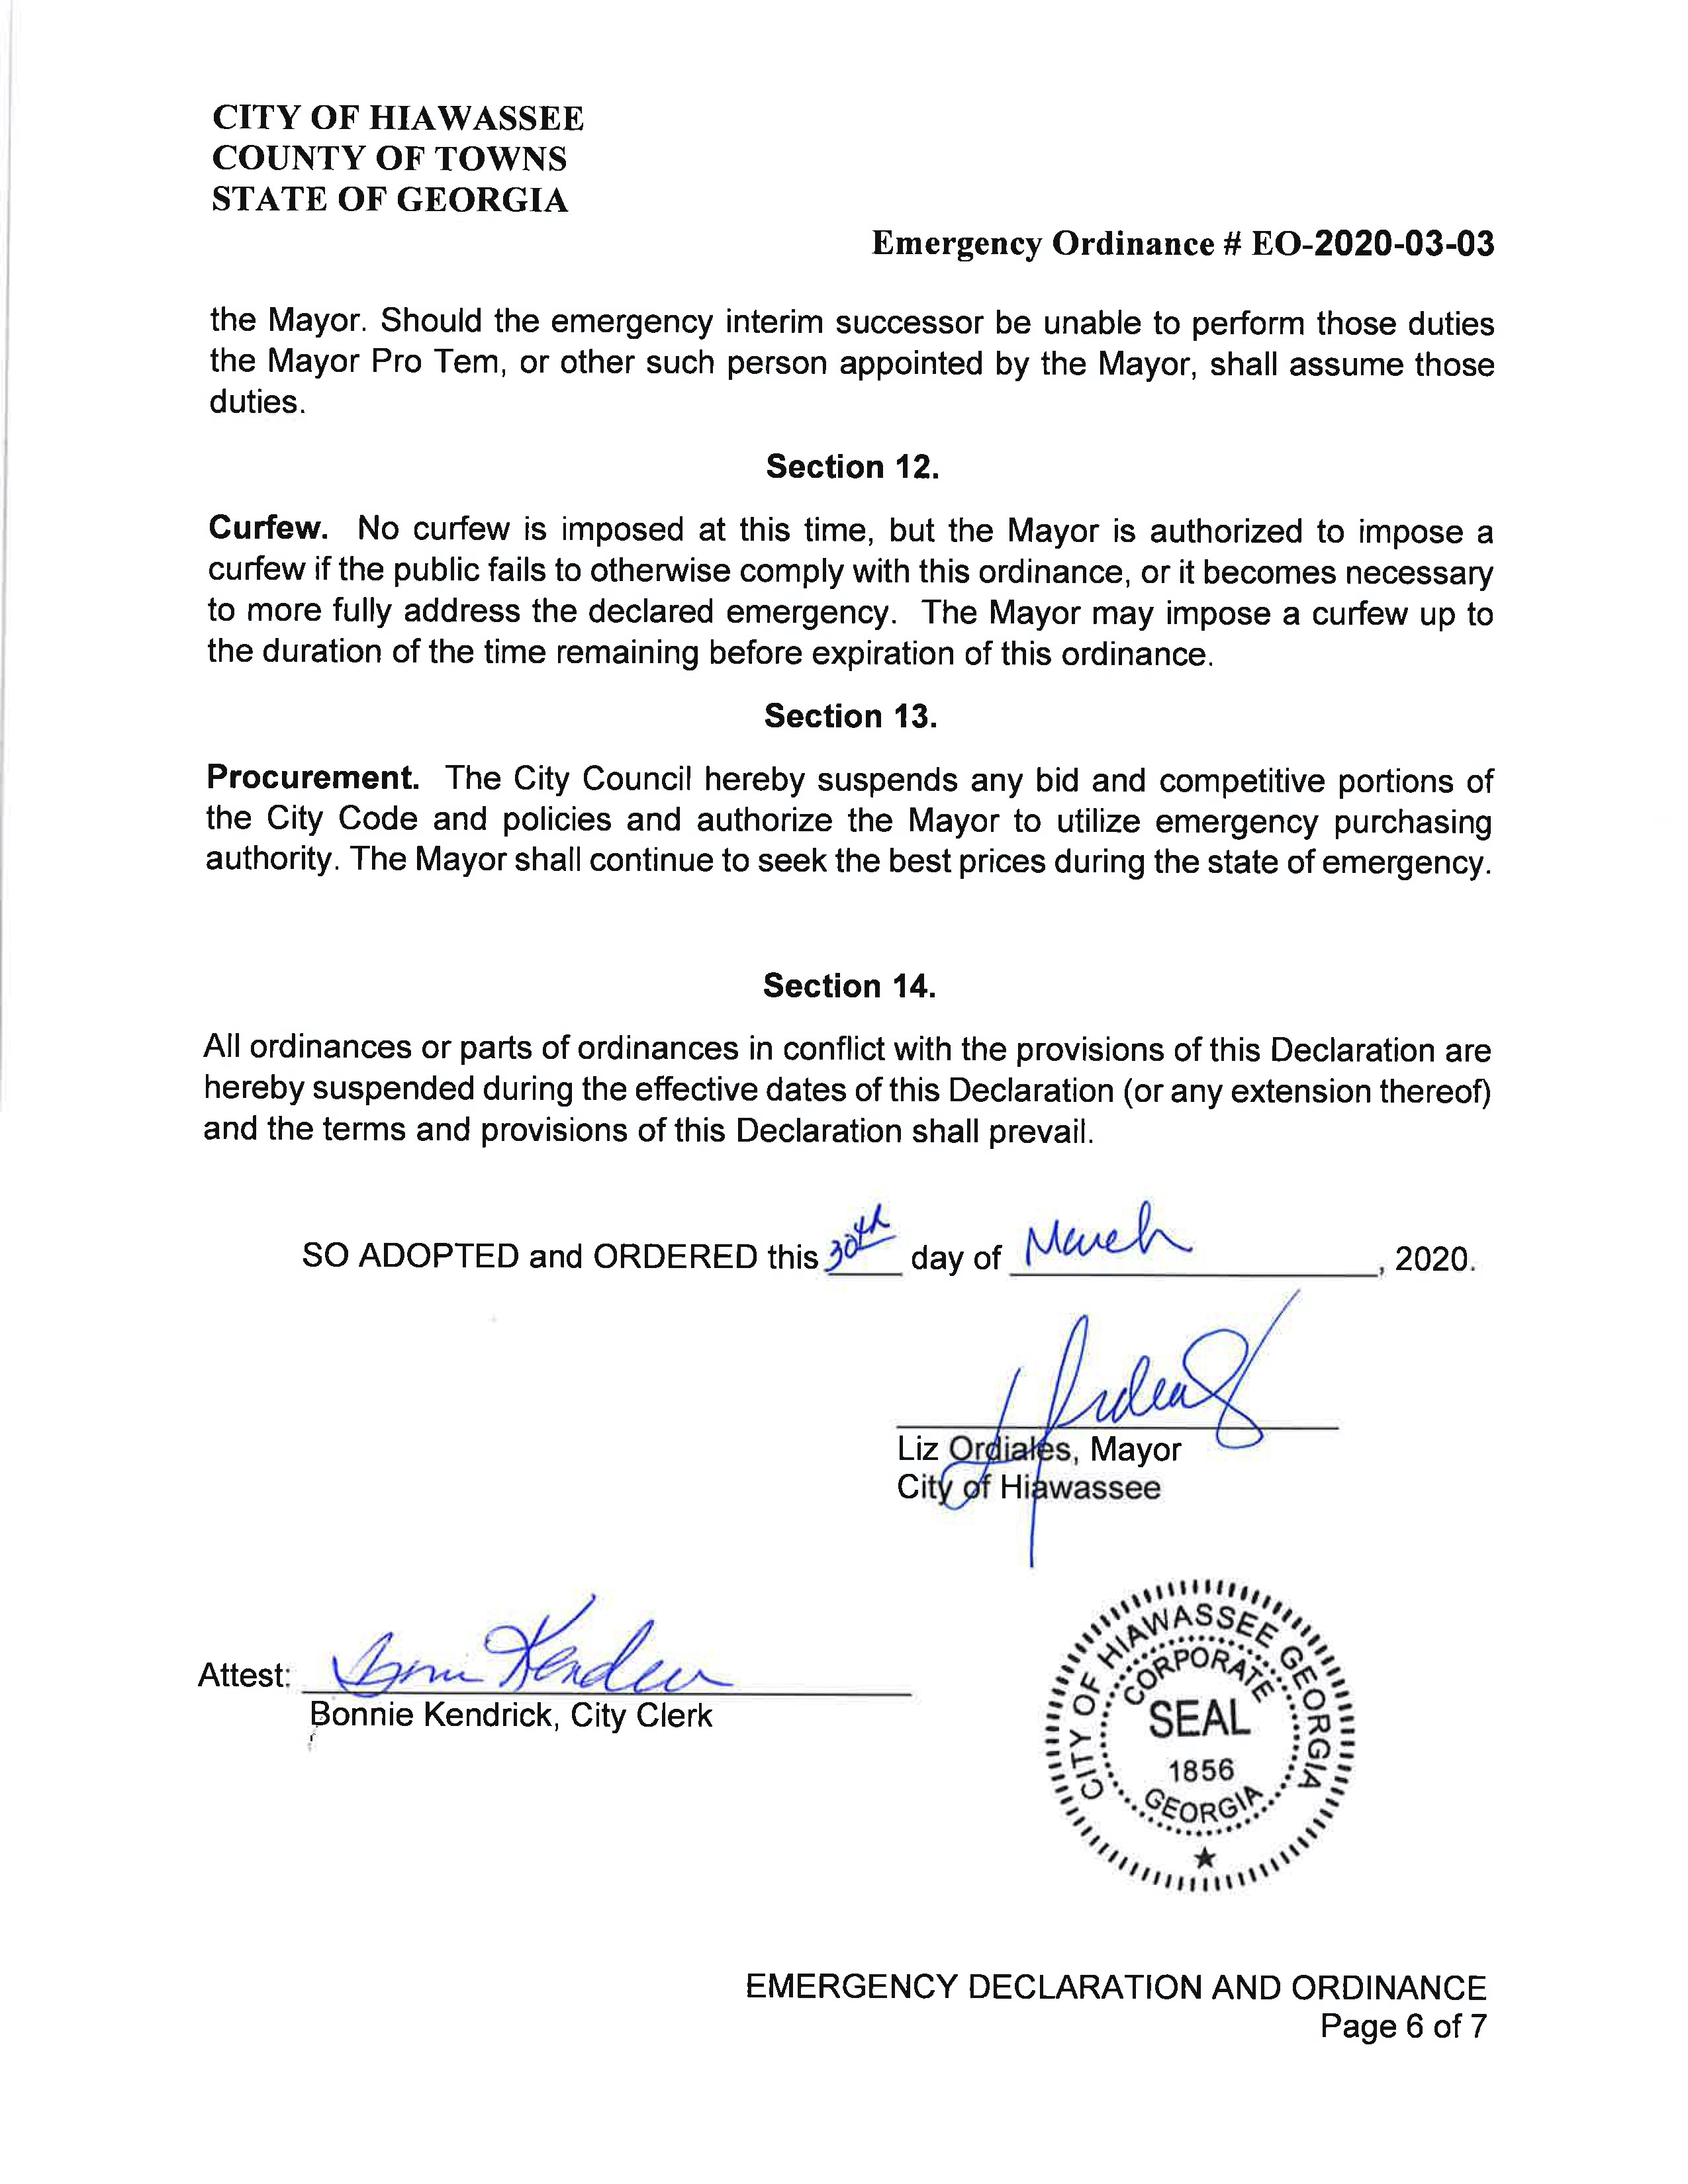 Emergency Declaration and Ordinace approved by Council-1